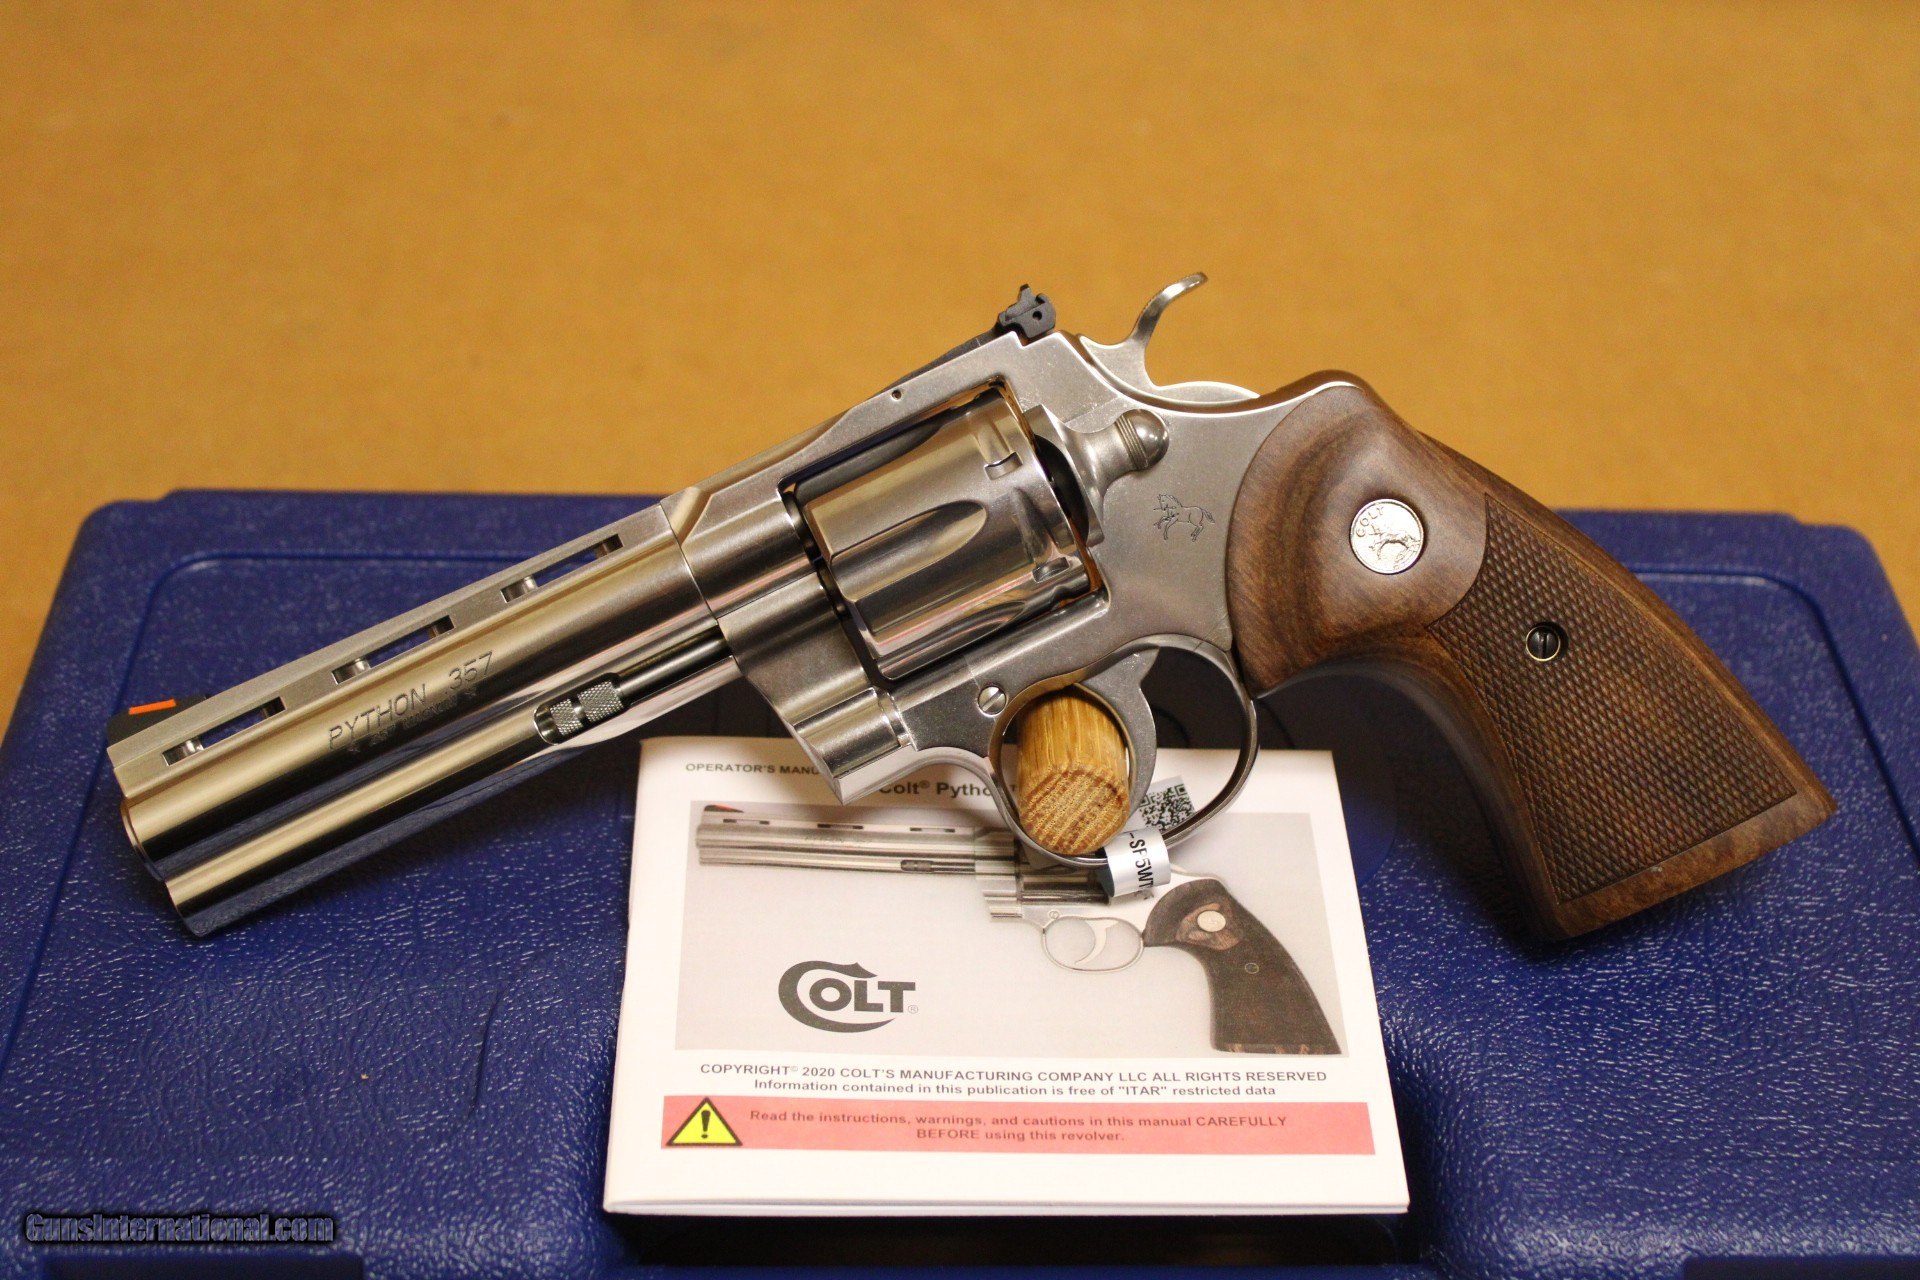 NEW Colt Python (5-inch, 357 Magnum, Stainless) SP5WTS